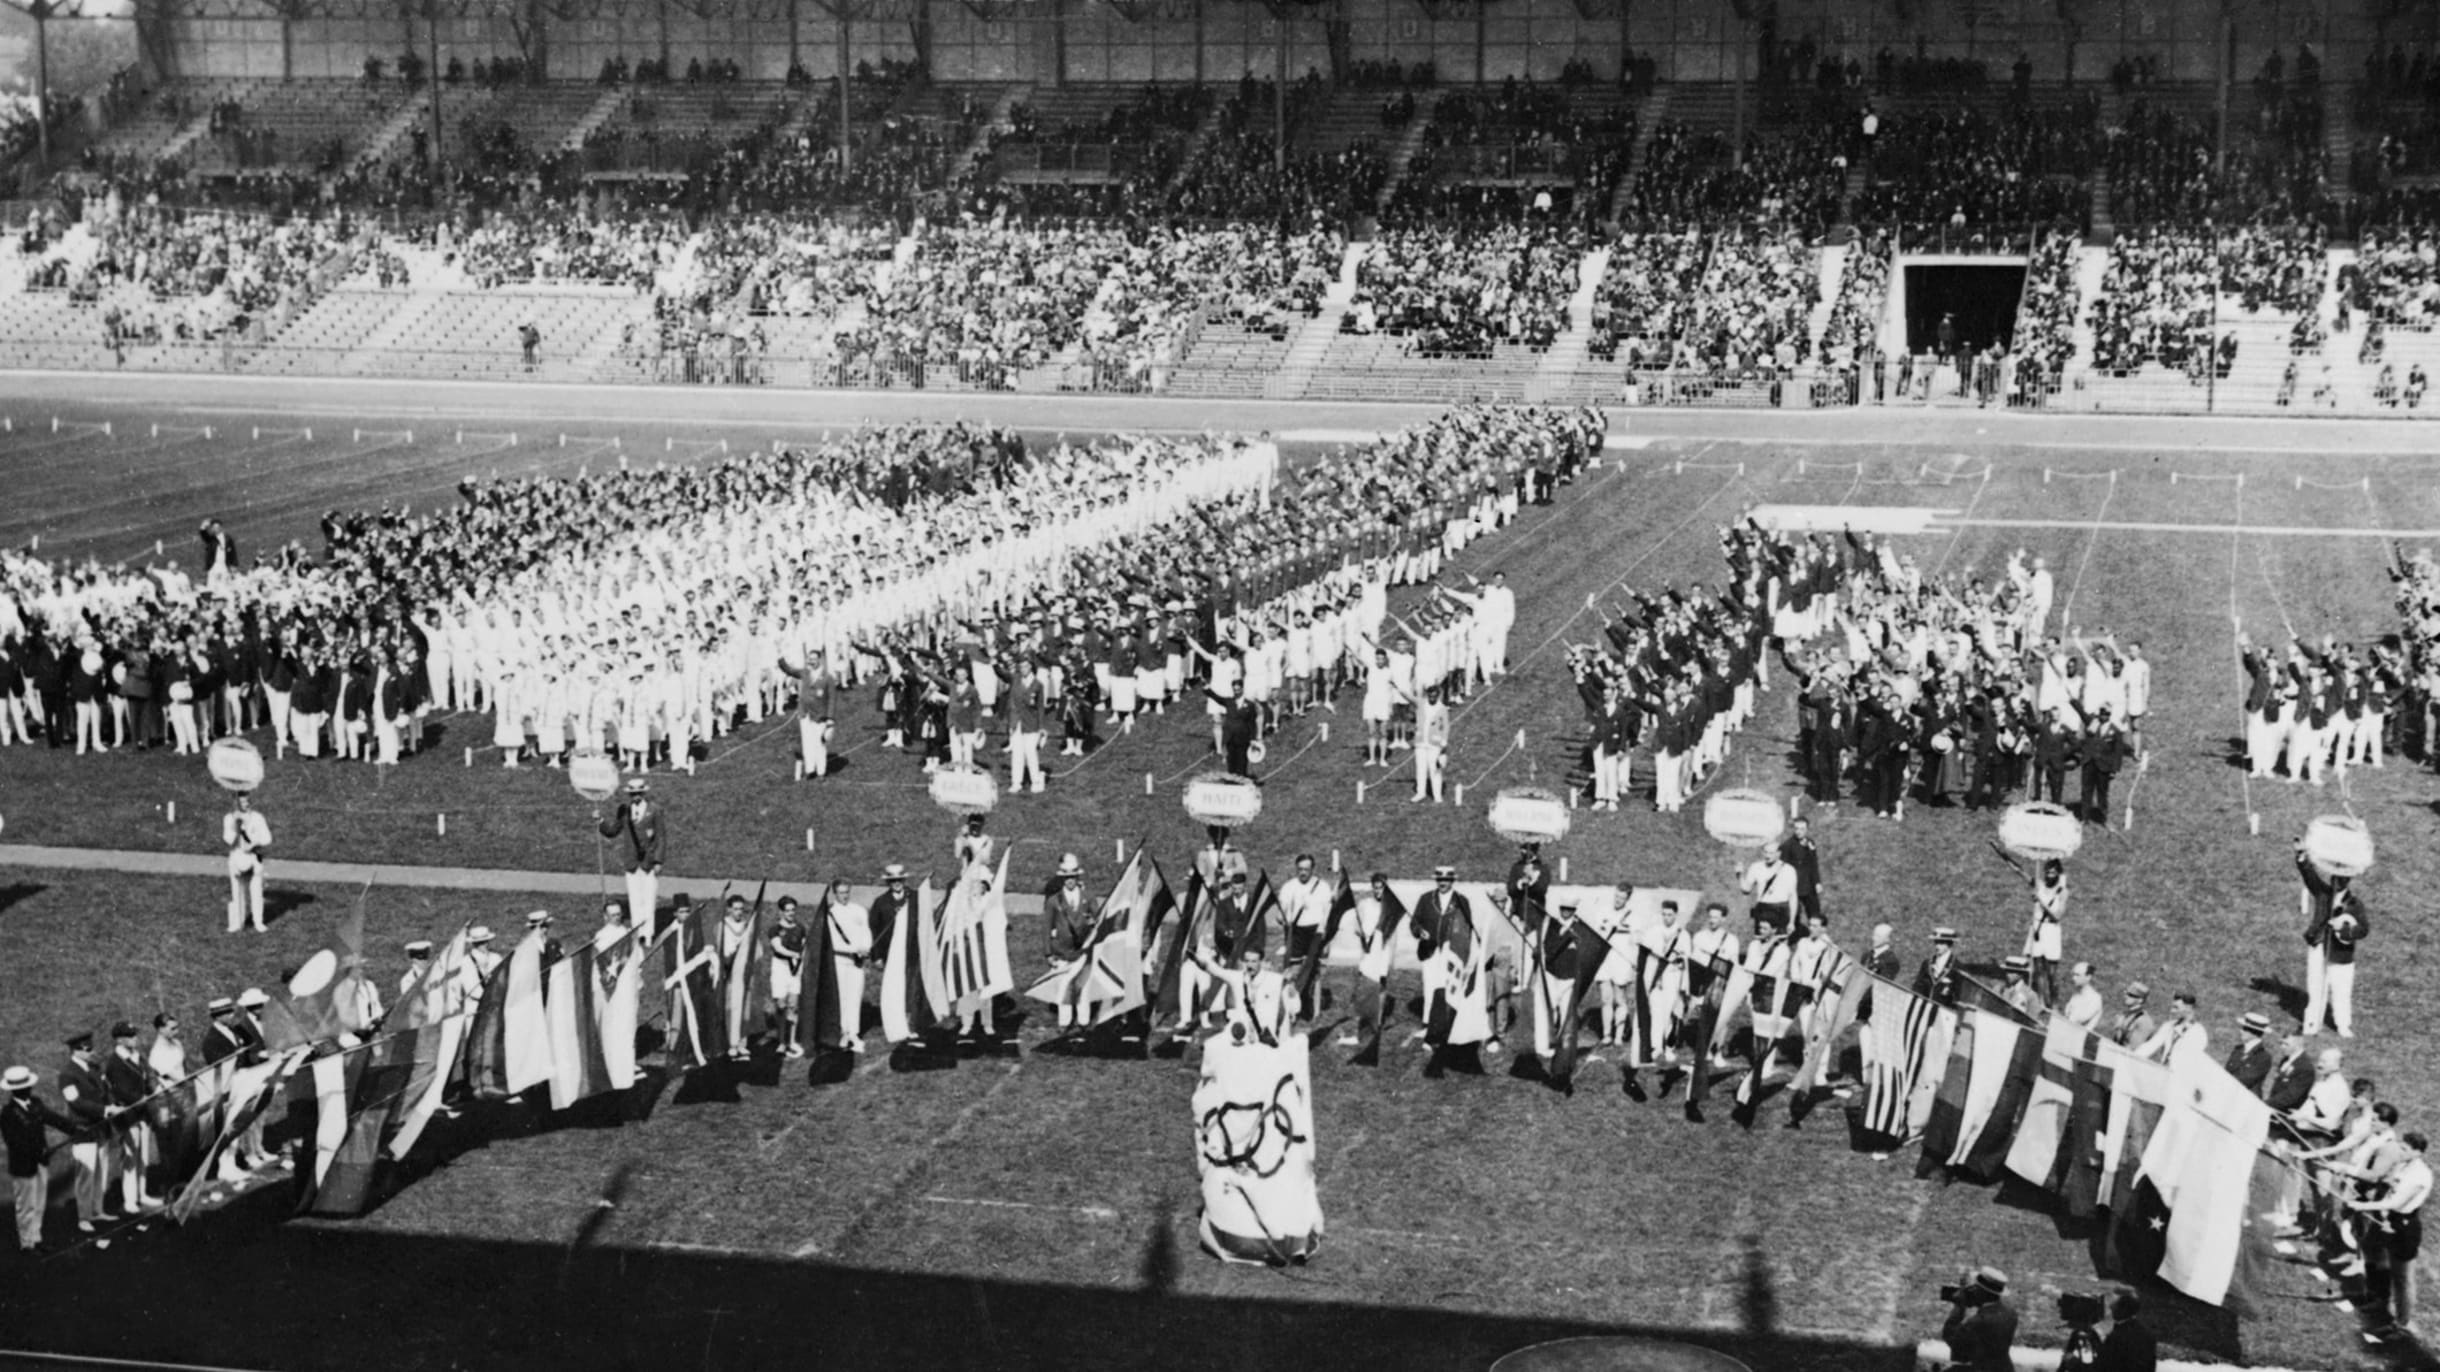 Paris 1924: The Olympic Games come of age - Olympic News